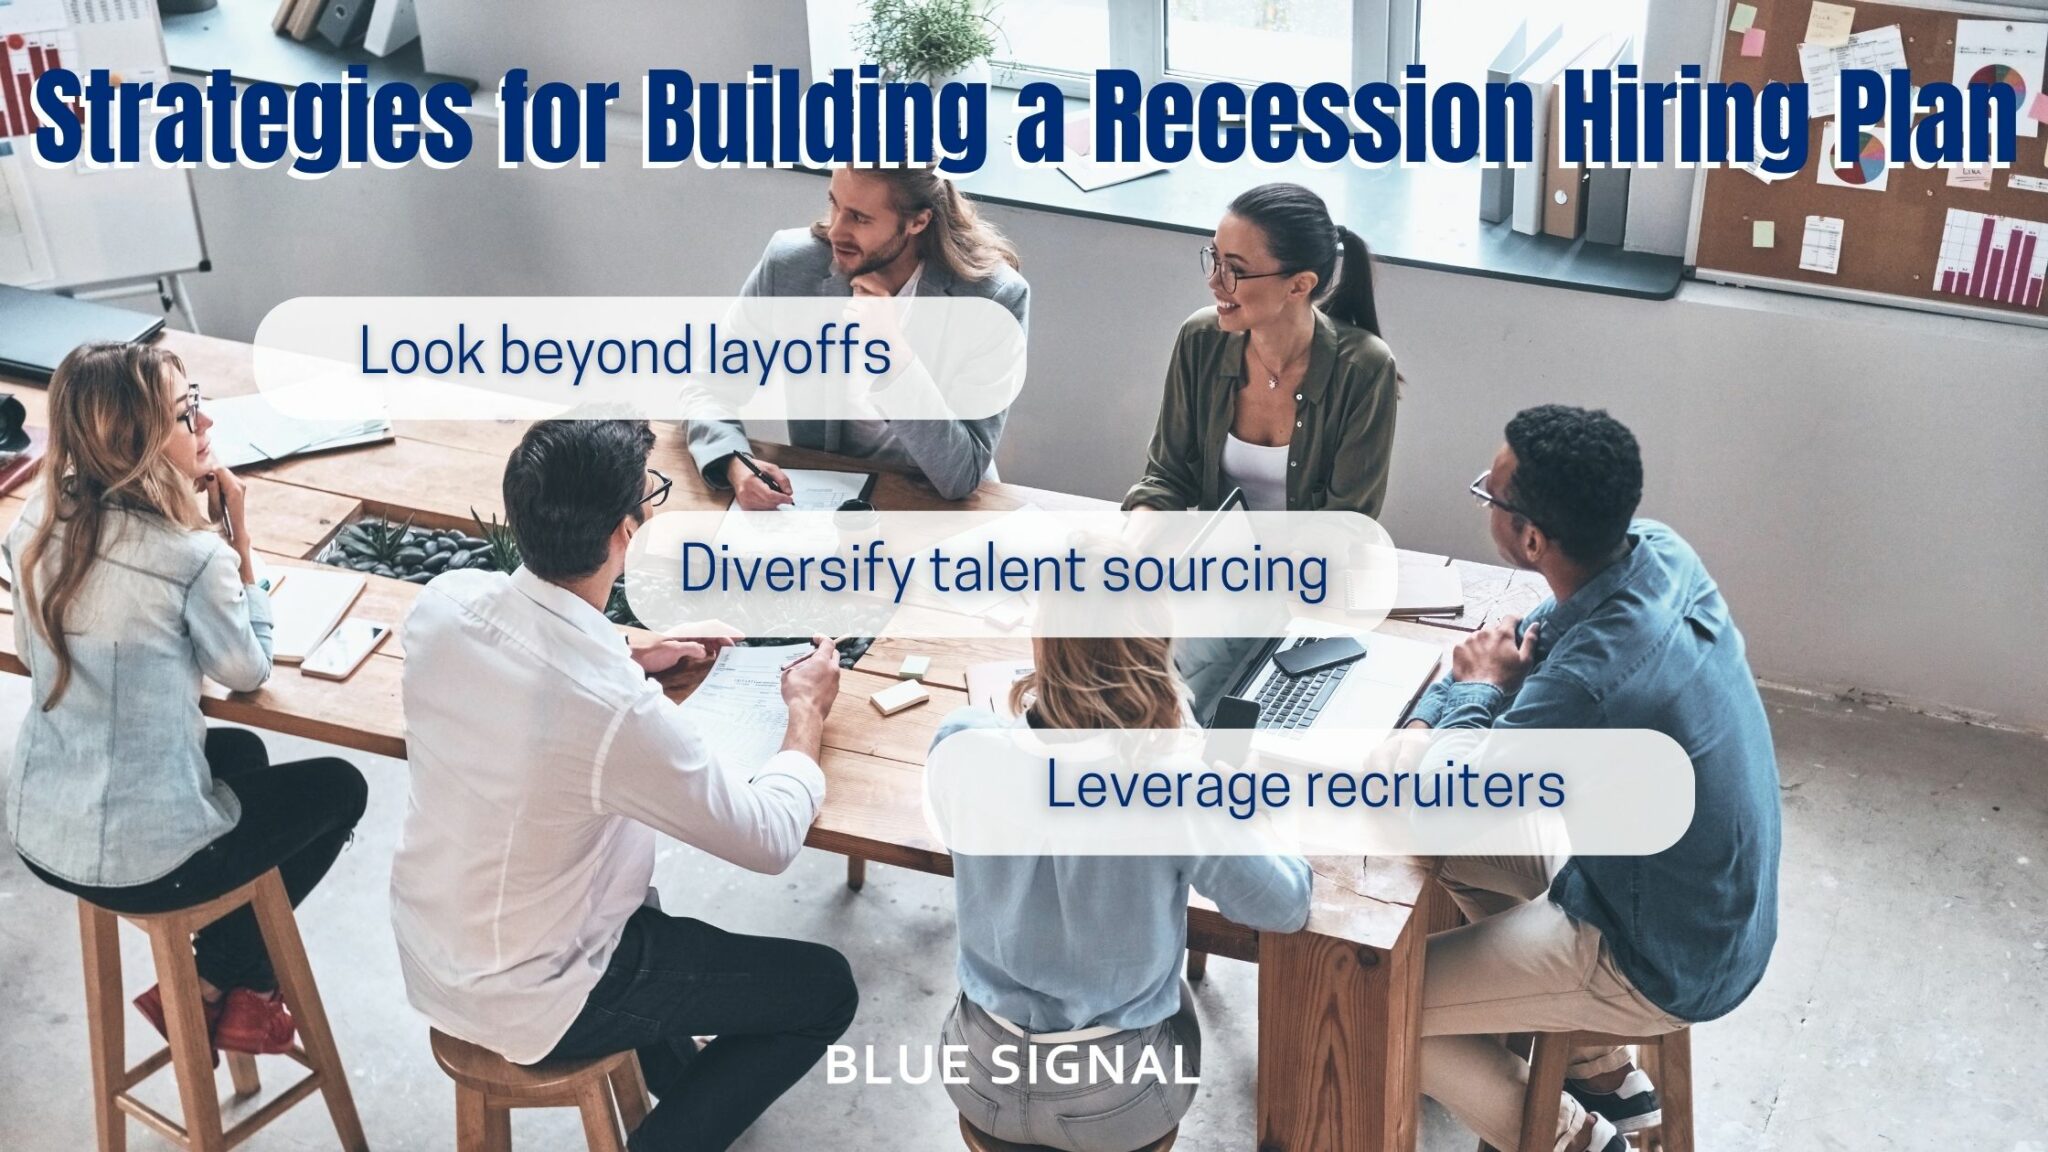 BAckground is group of employees wokring together to develop a recession hiring plan. The foregraound lists the three main points to keep in mind when developing the recession hiring plan.